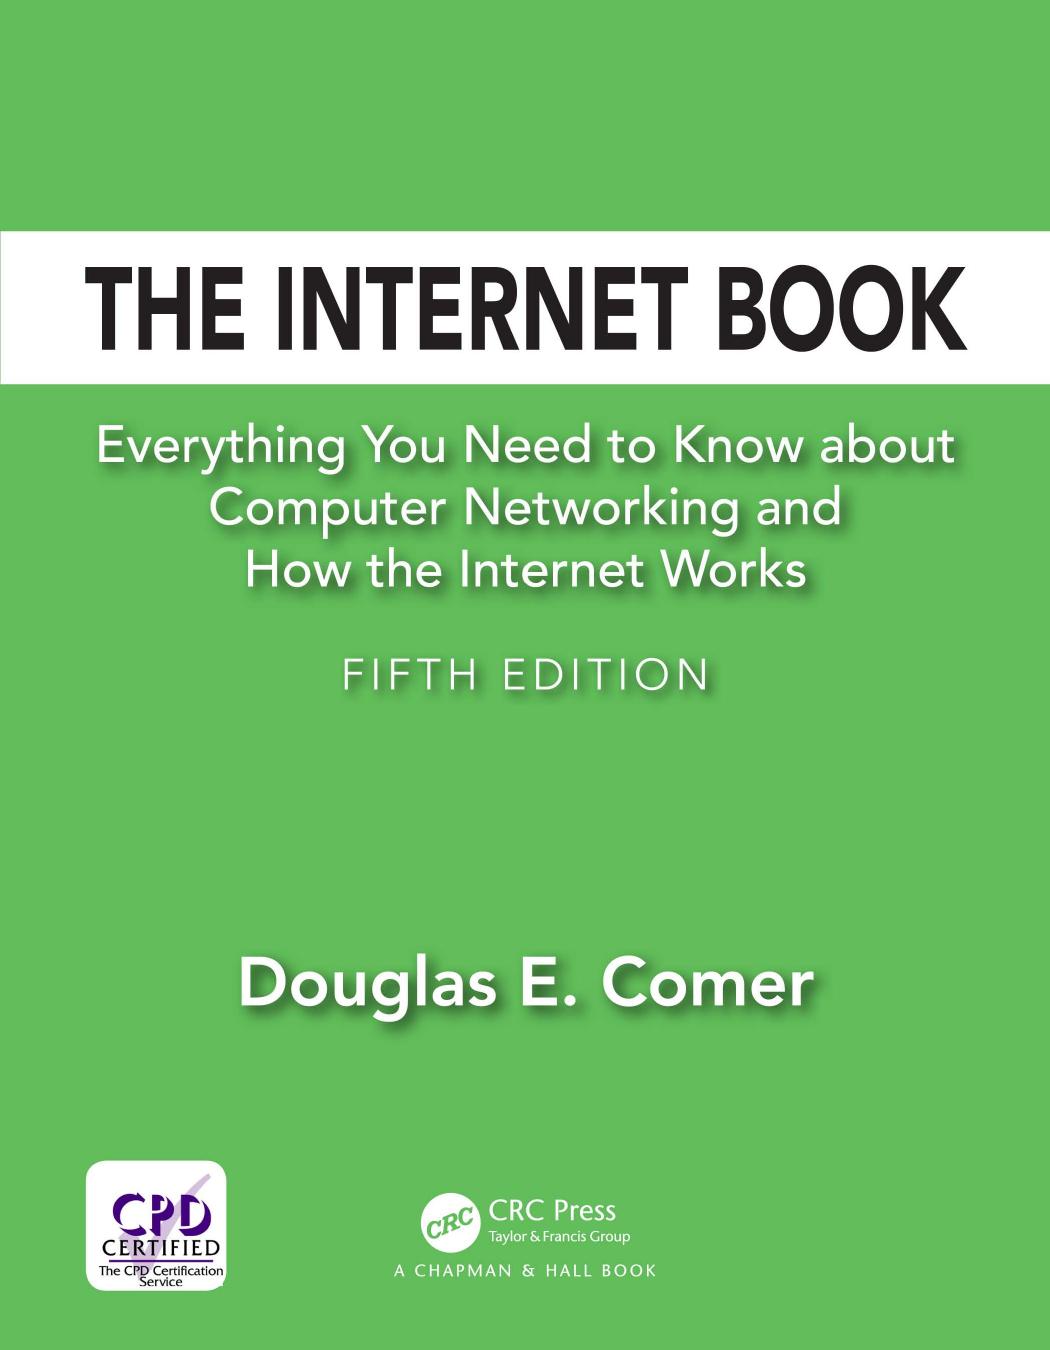 The Internet Book : Everything You Need to Know About Computer Networking and How the Internet Works, Fifth Edition